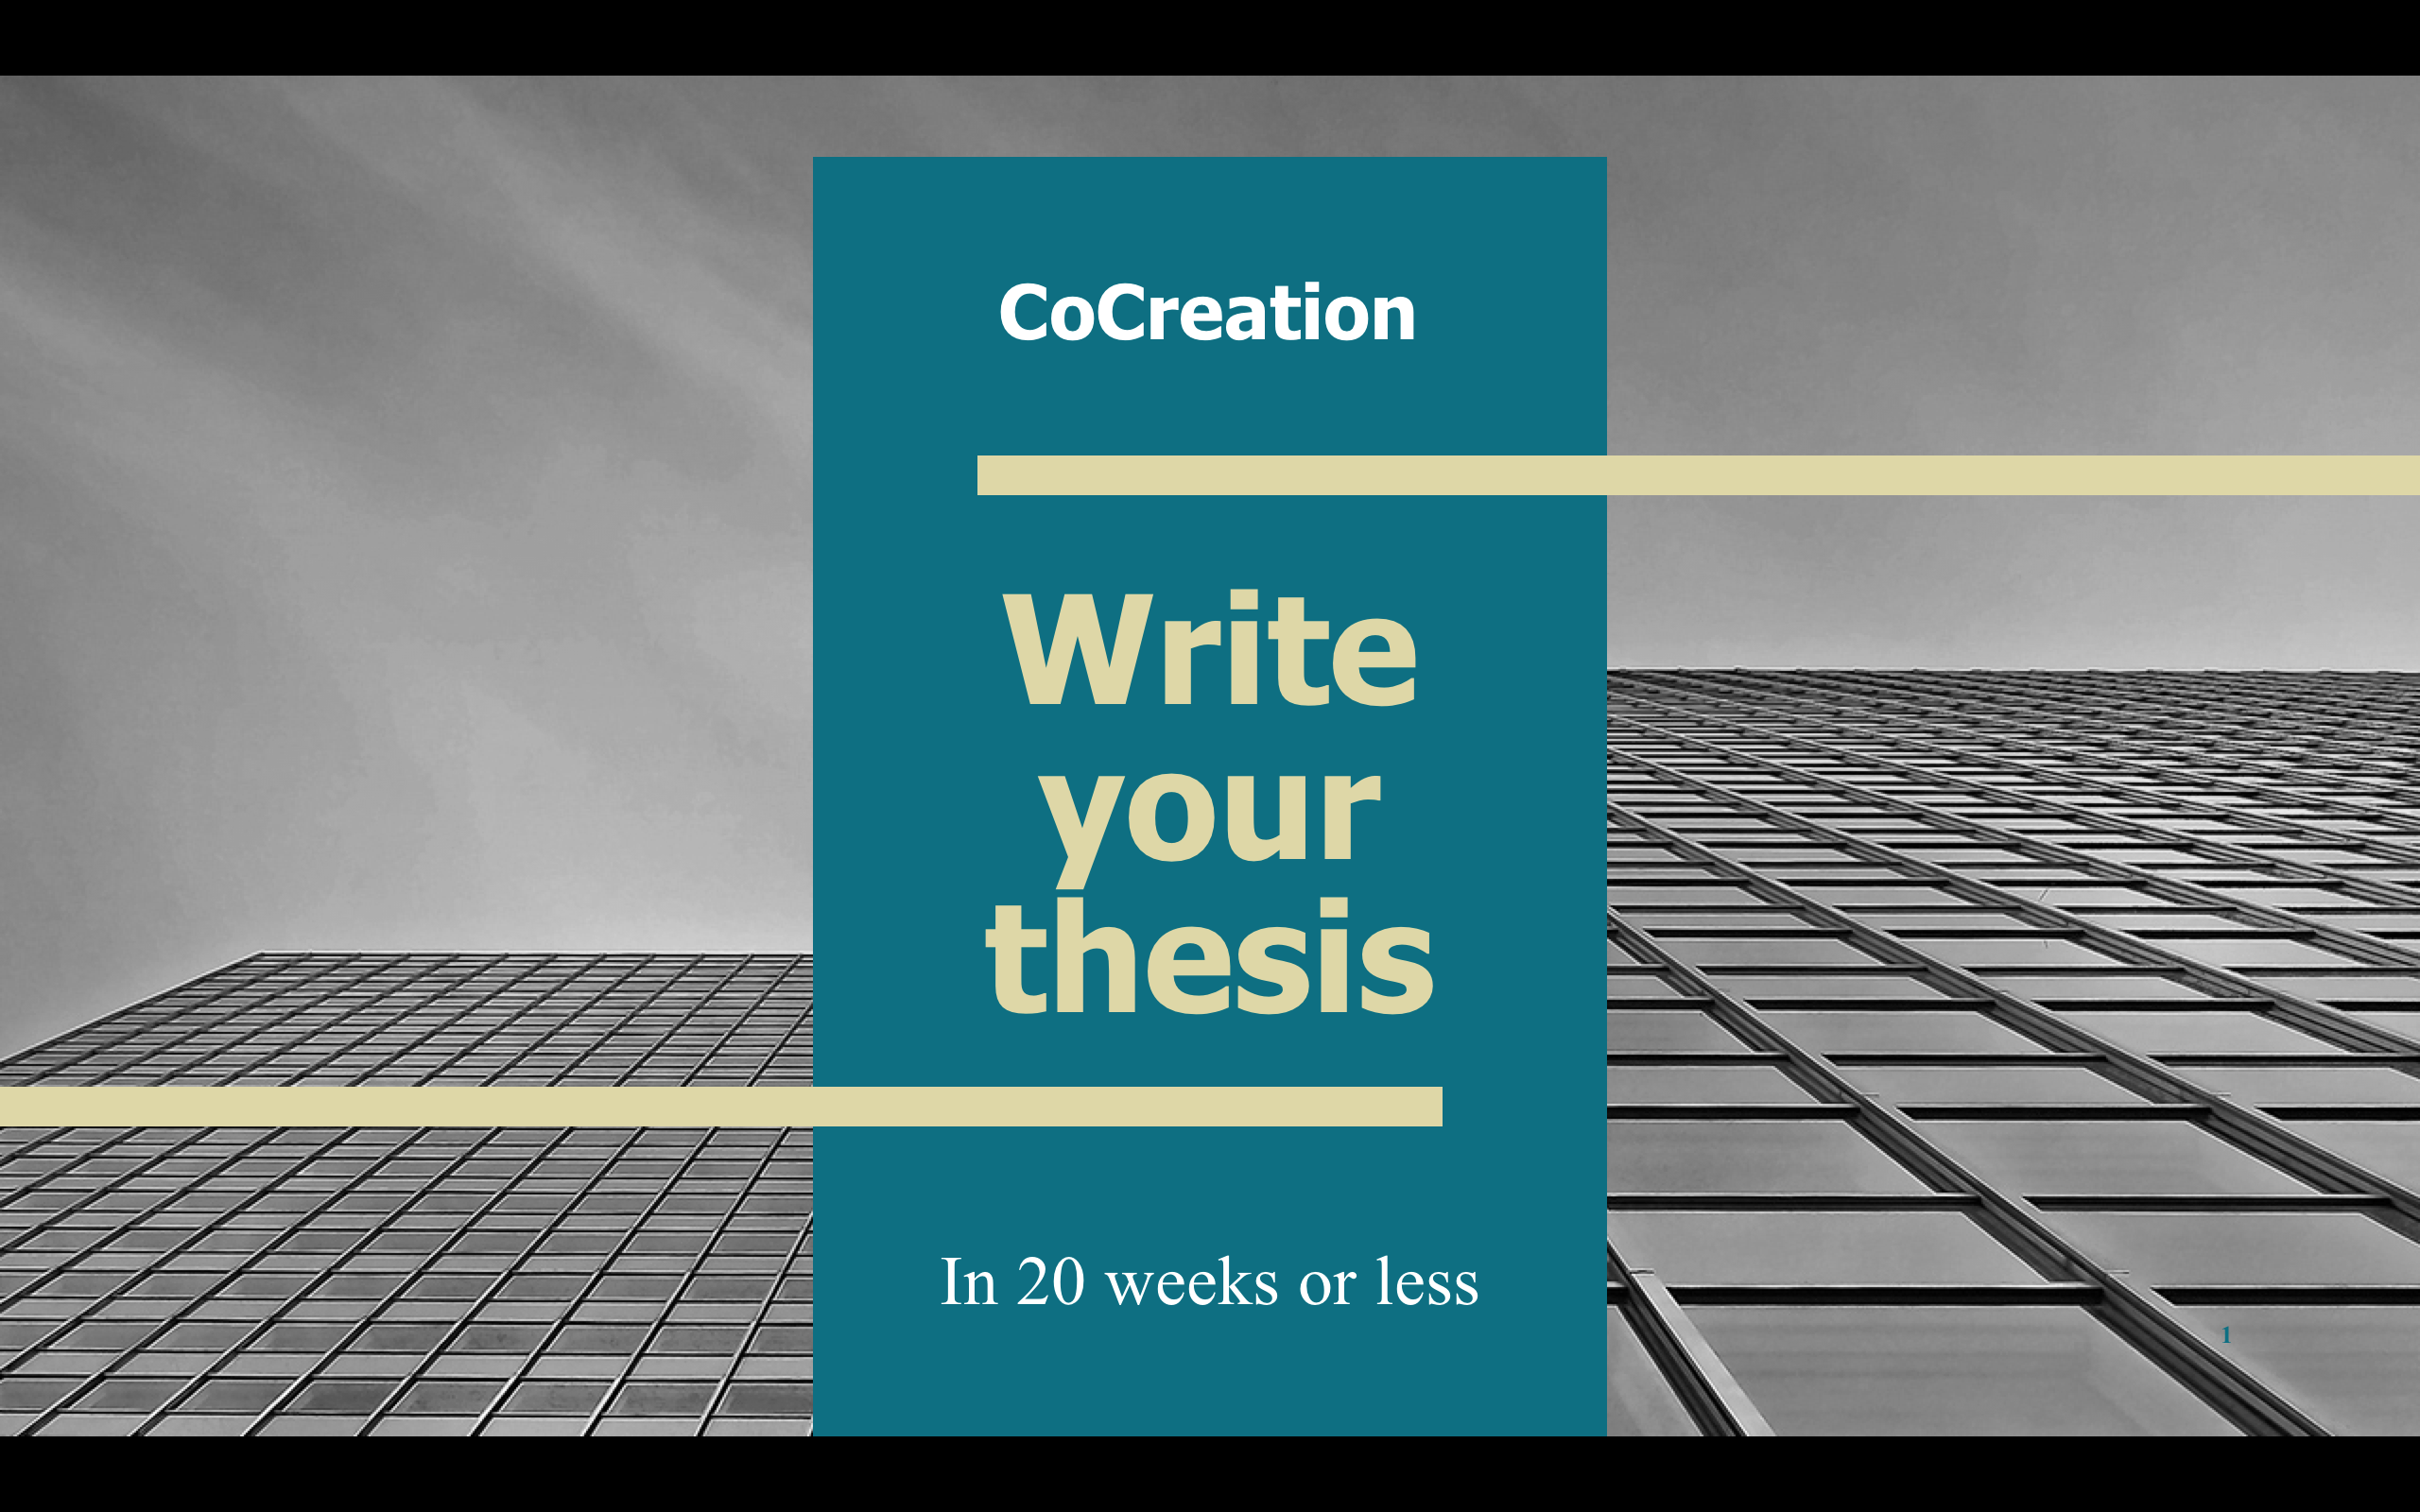 Write your master thesis in 20 weeks or less